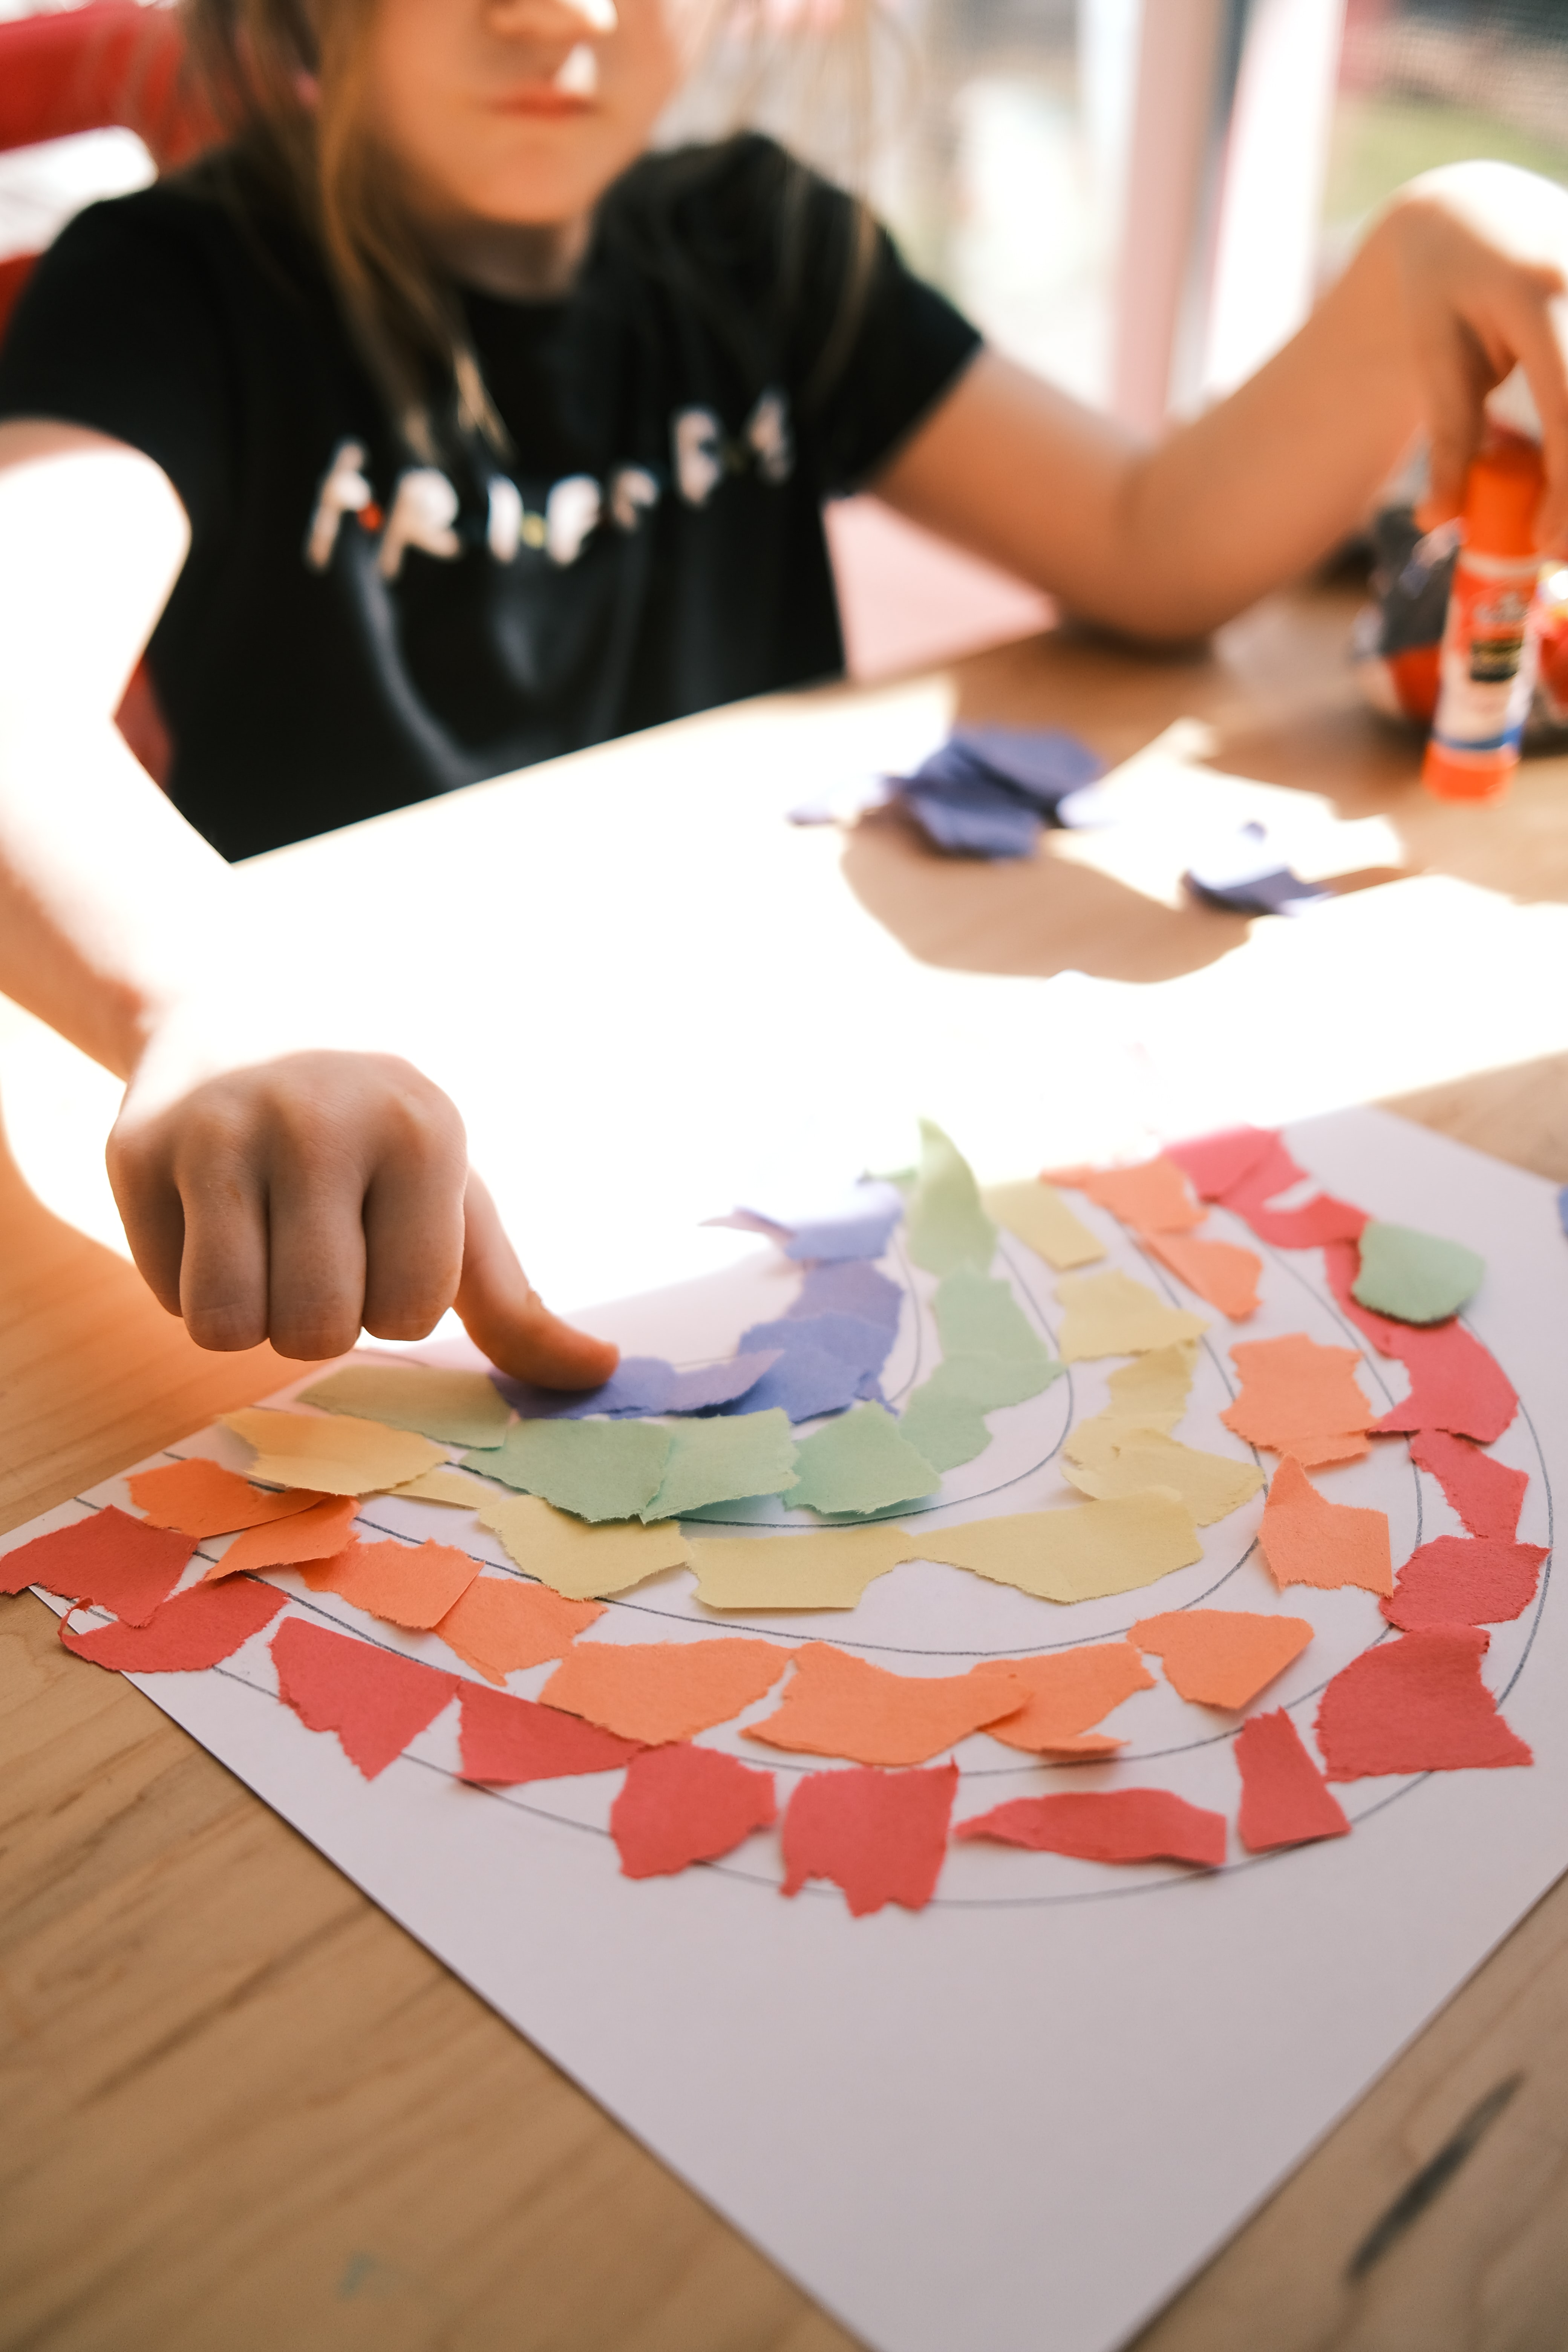 Child arranging torn pieces of colored construction paper on rainbow